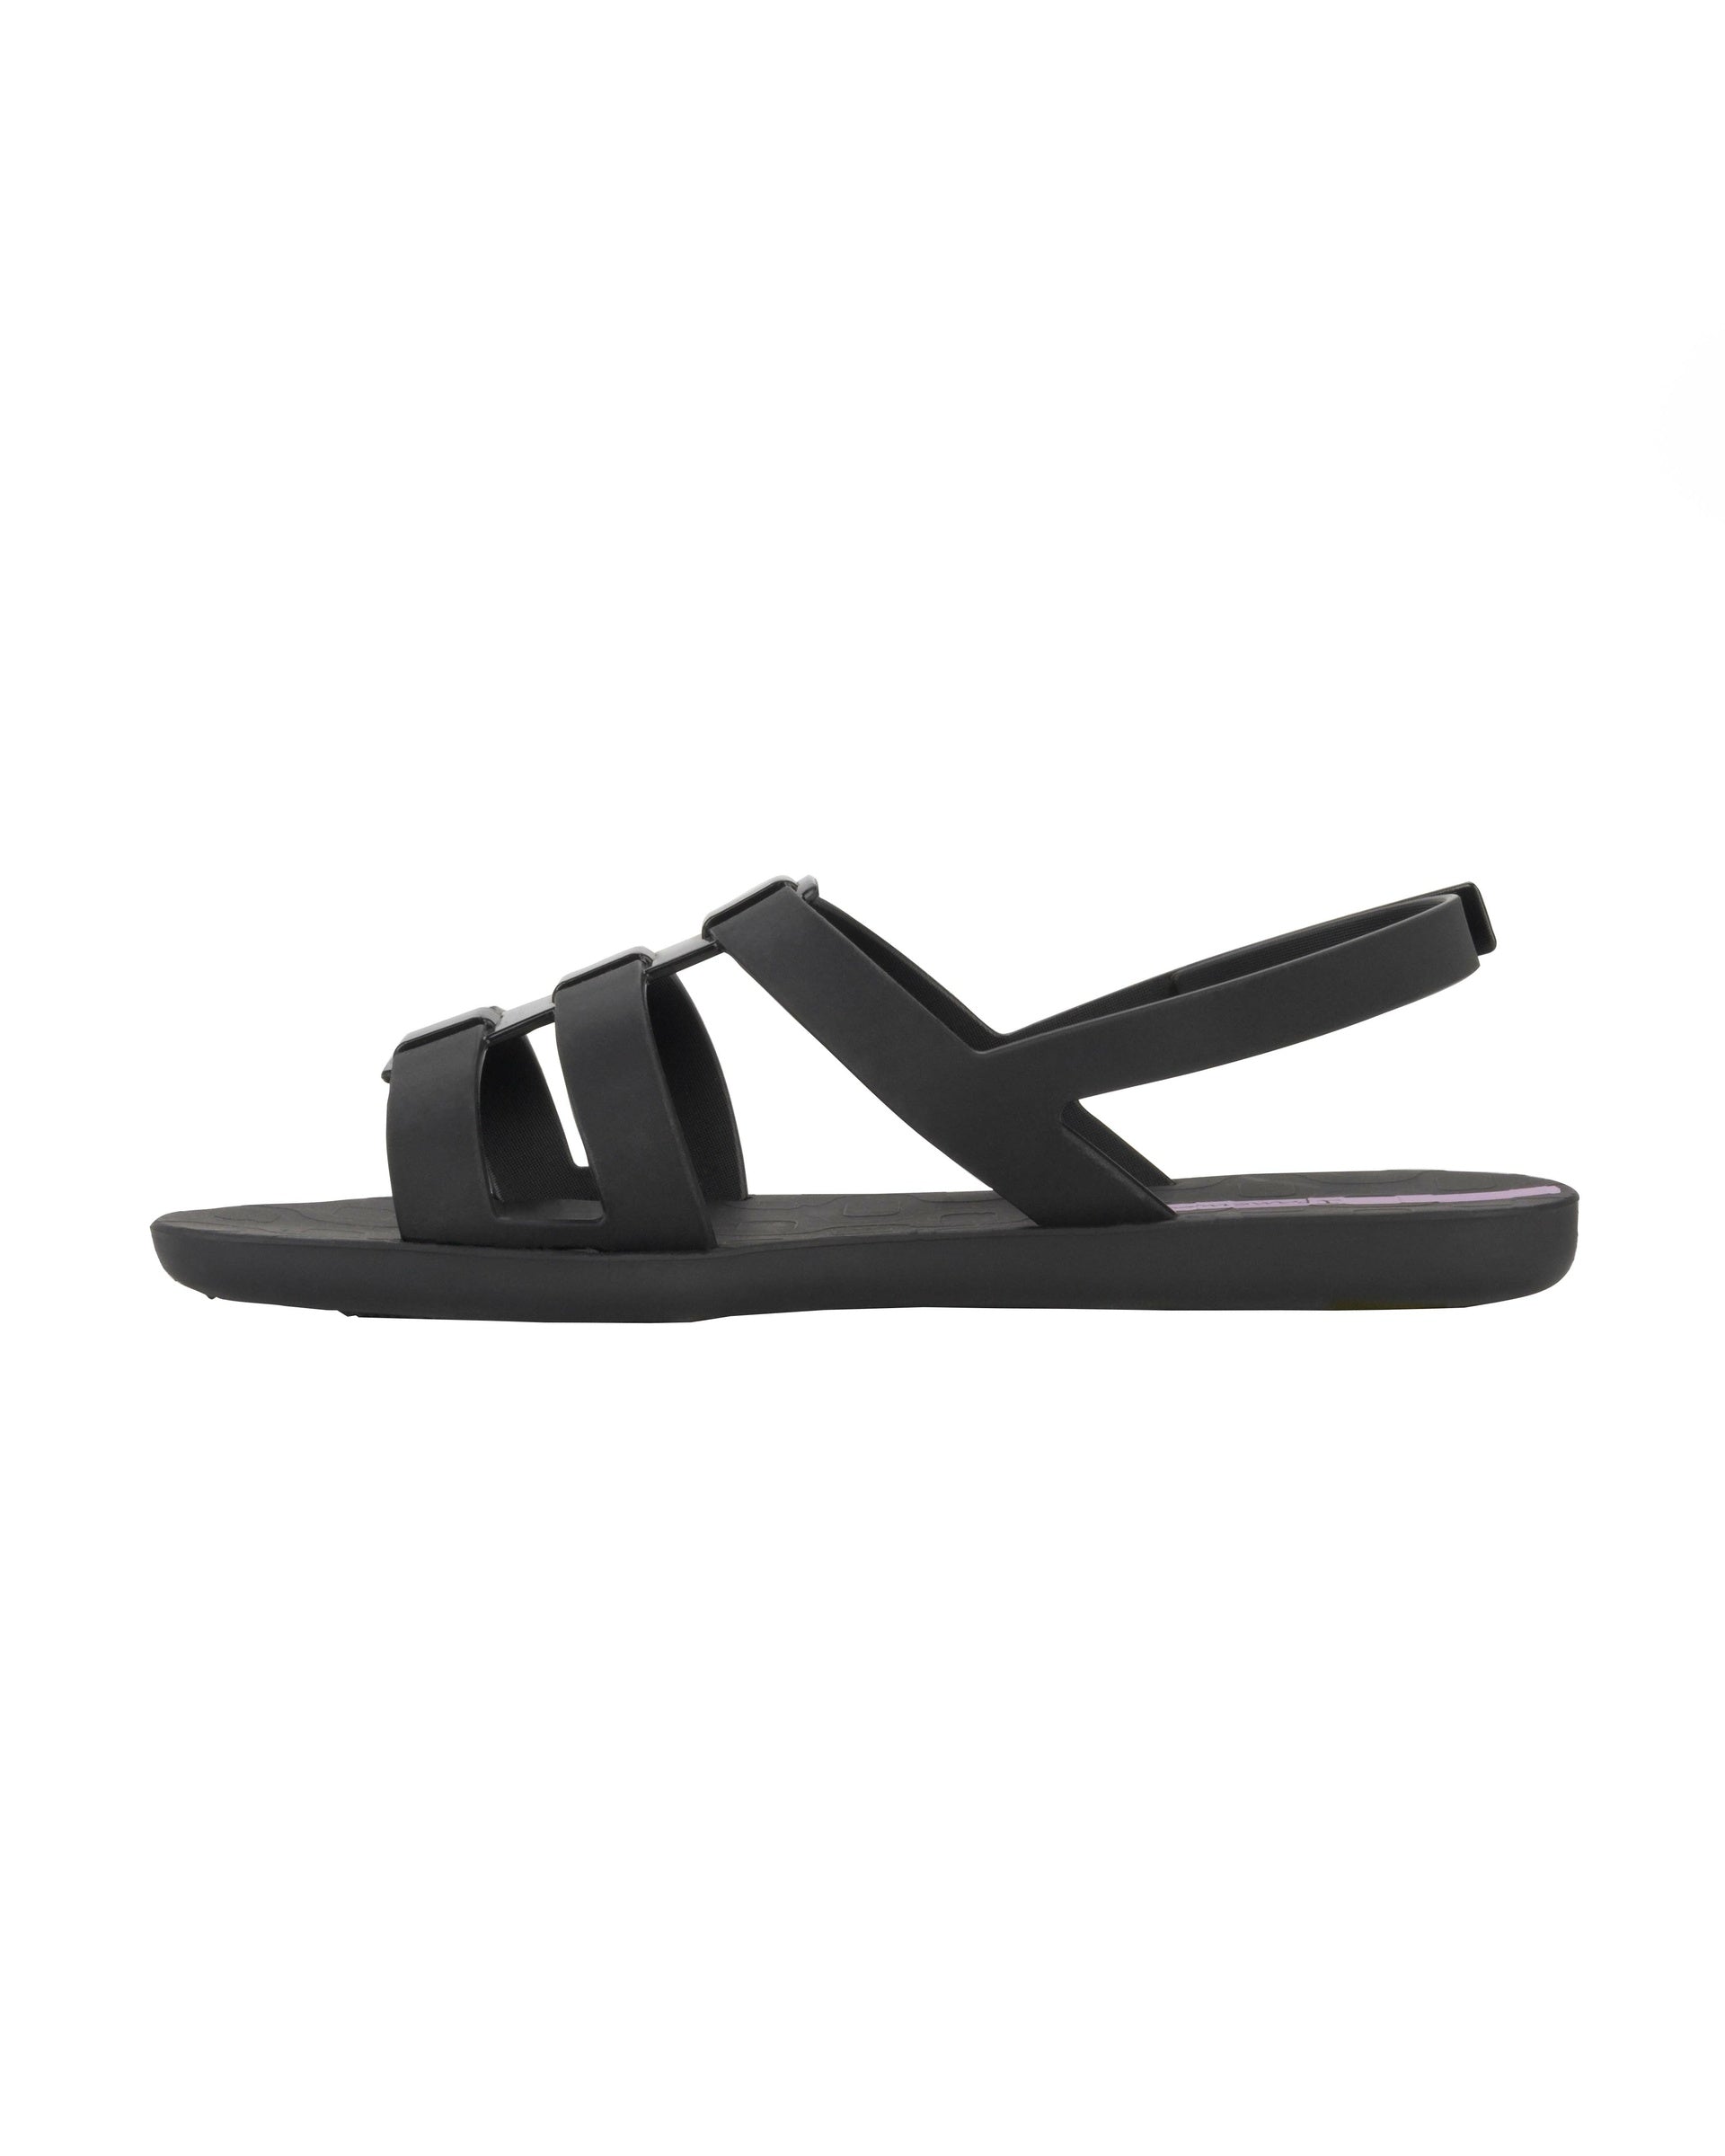 Inner side view of a black Ipanema Style women's sandal.